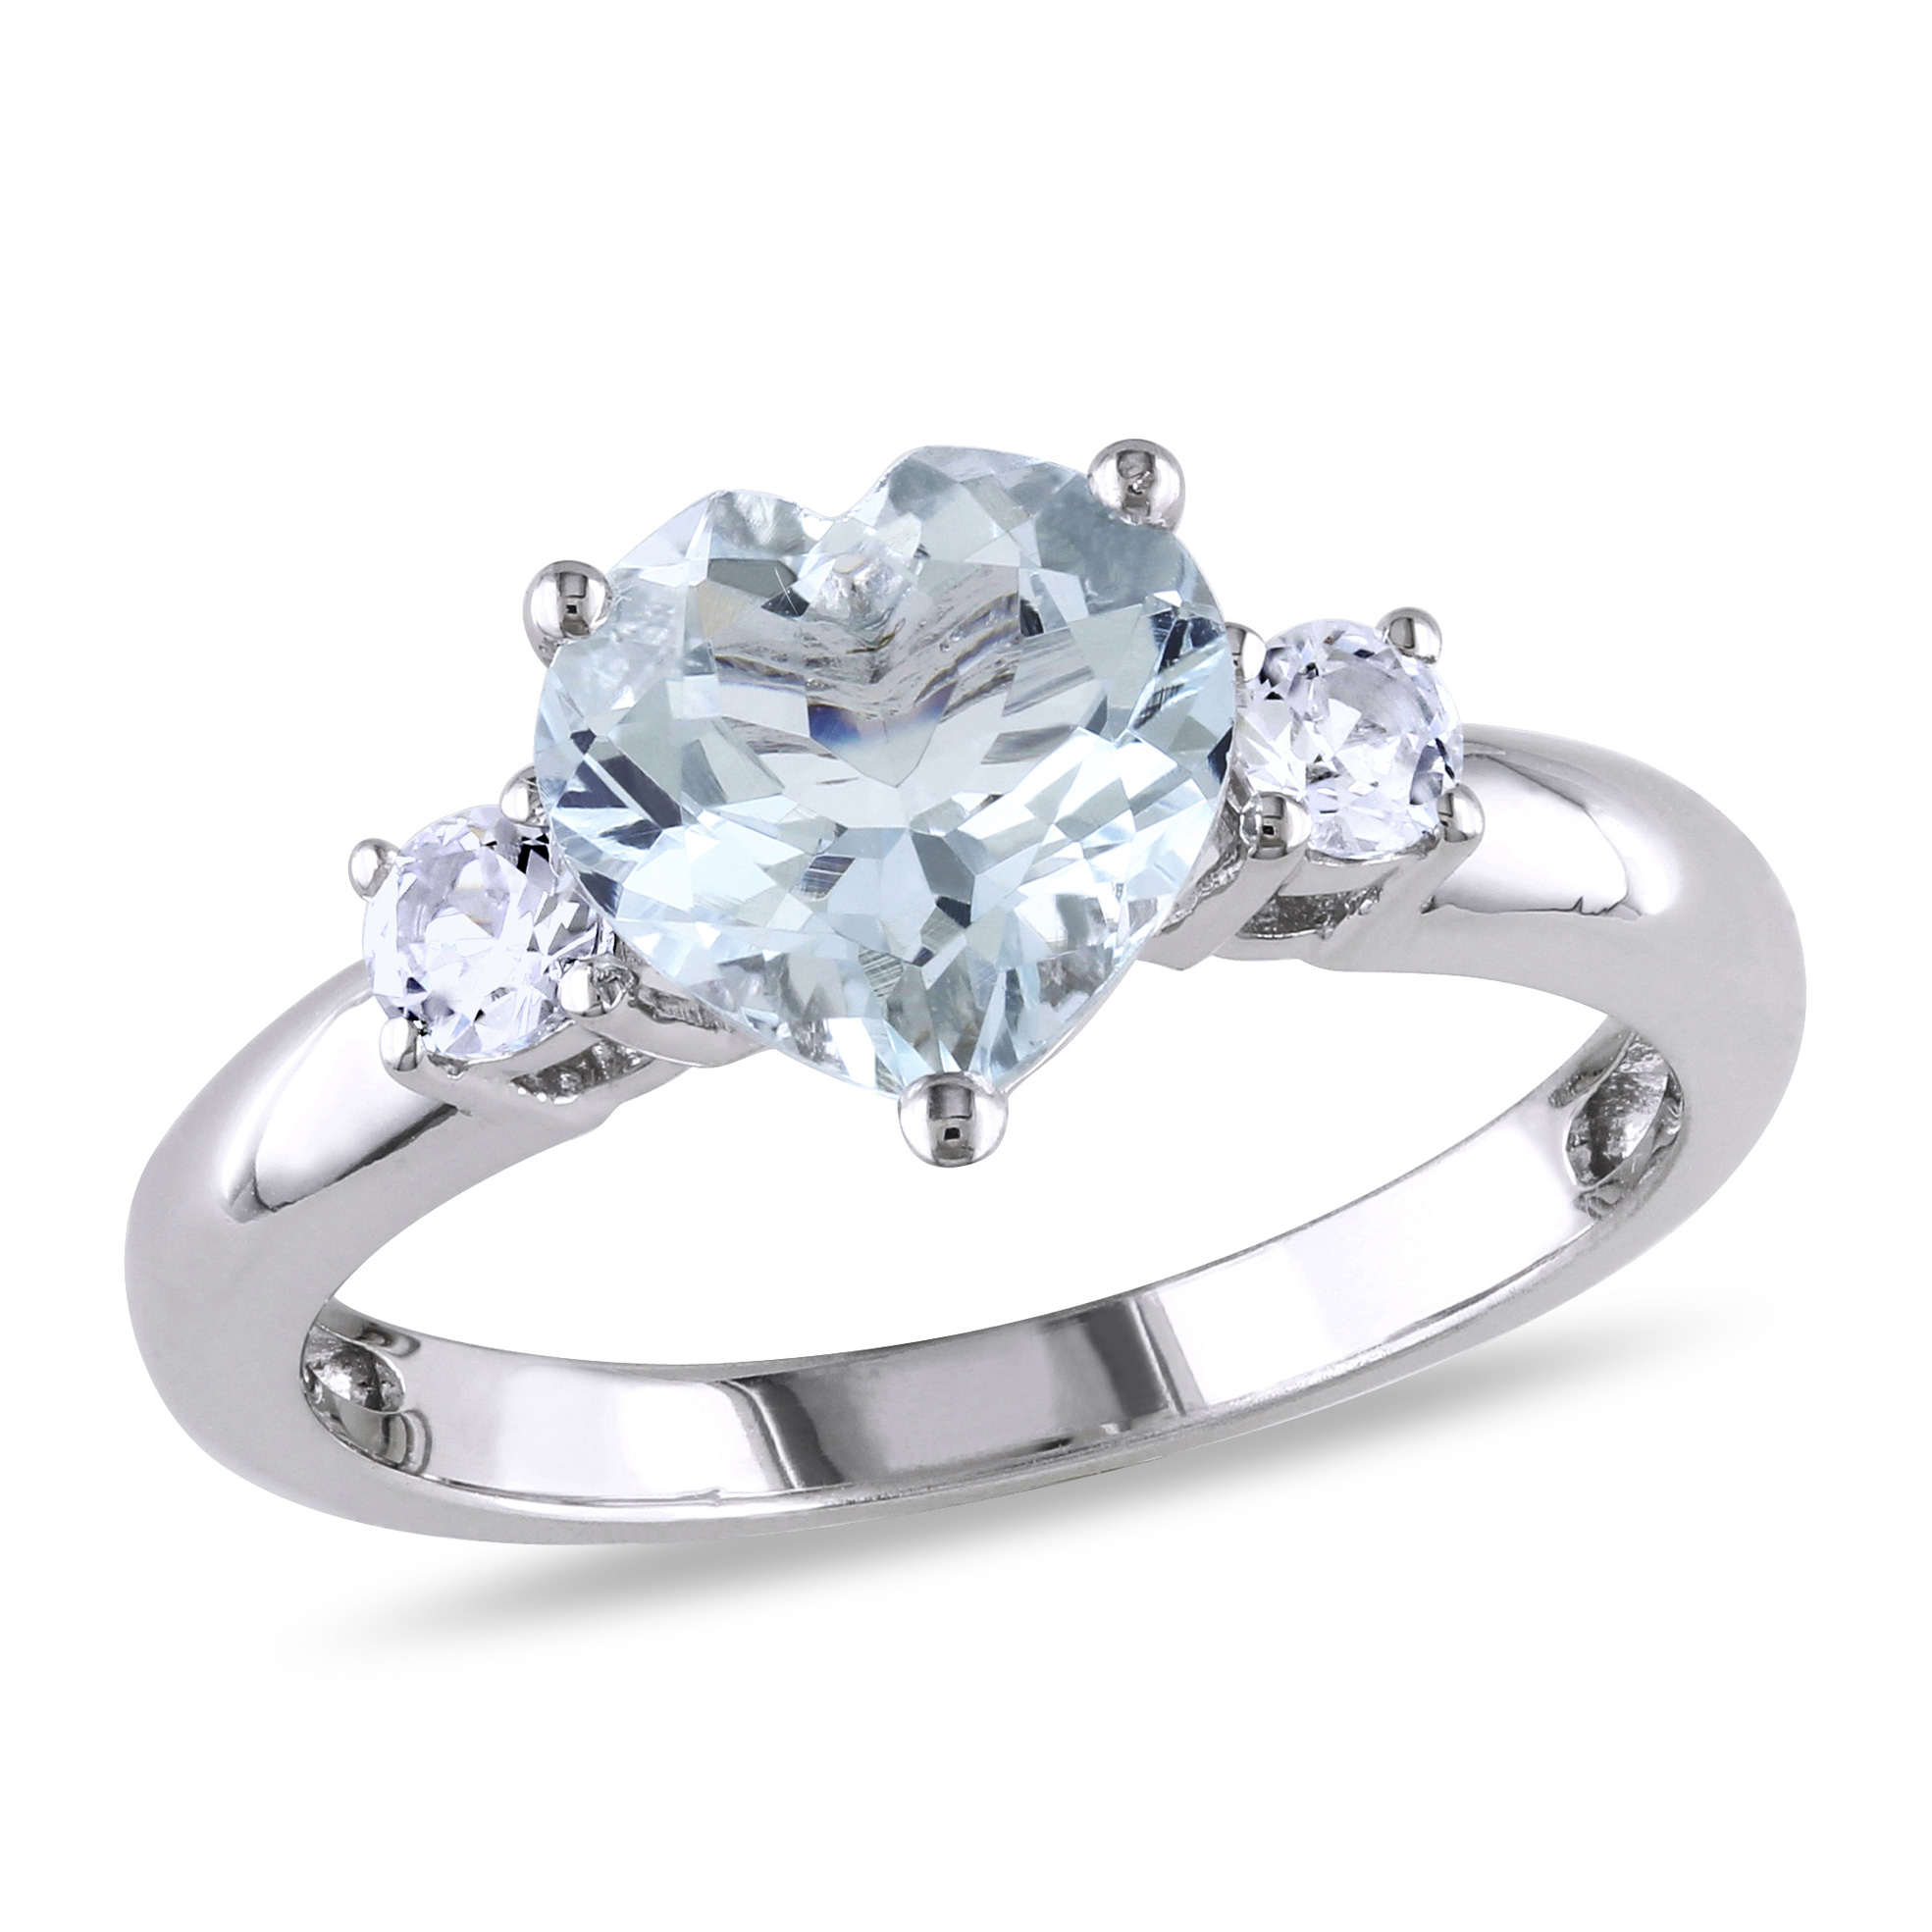 Heart-Shaped Aquamarine and Created White Sapphire Sterling Silver Ring - Size 5